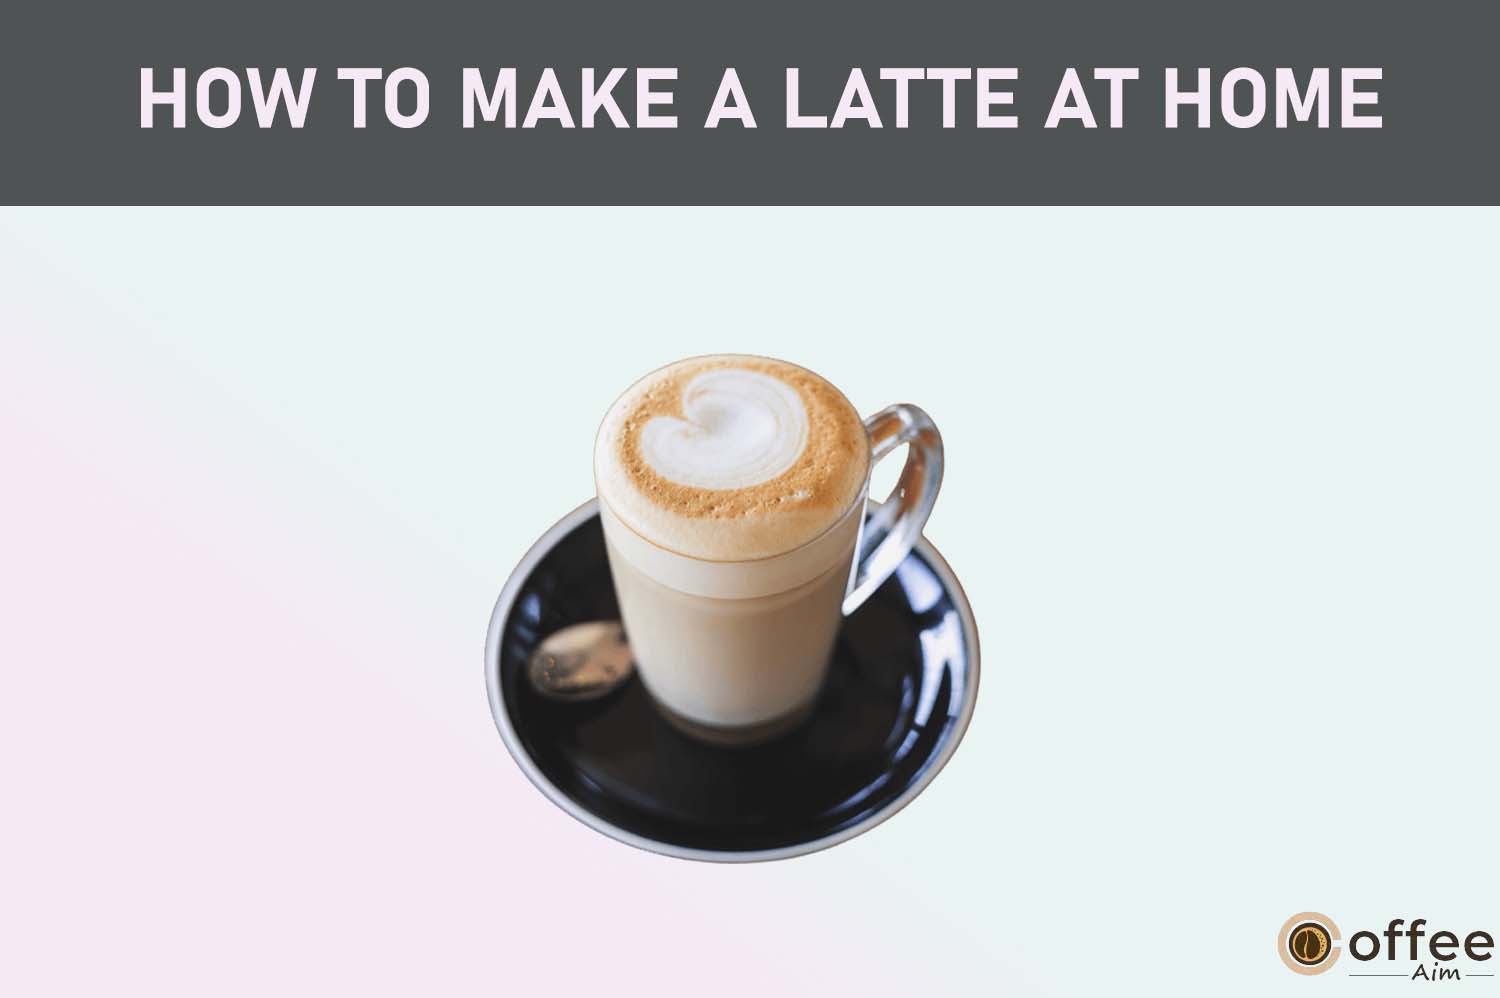 Featured image for the article "How to Make a Latte at Home"